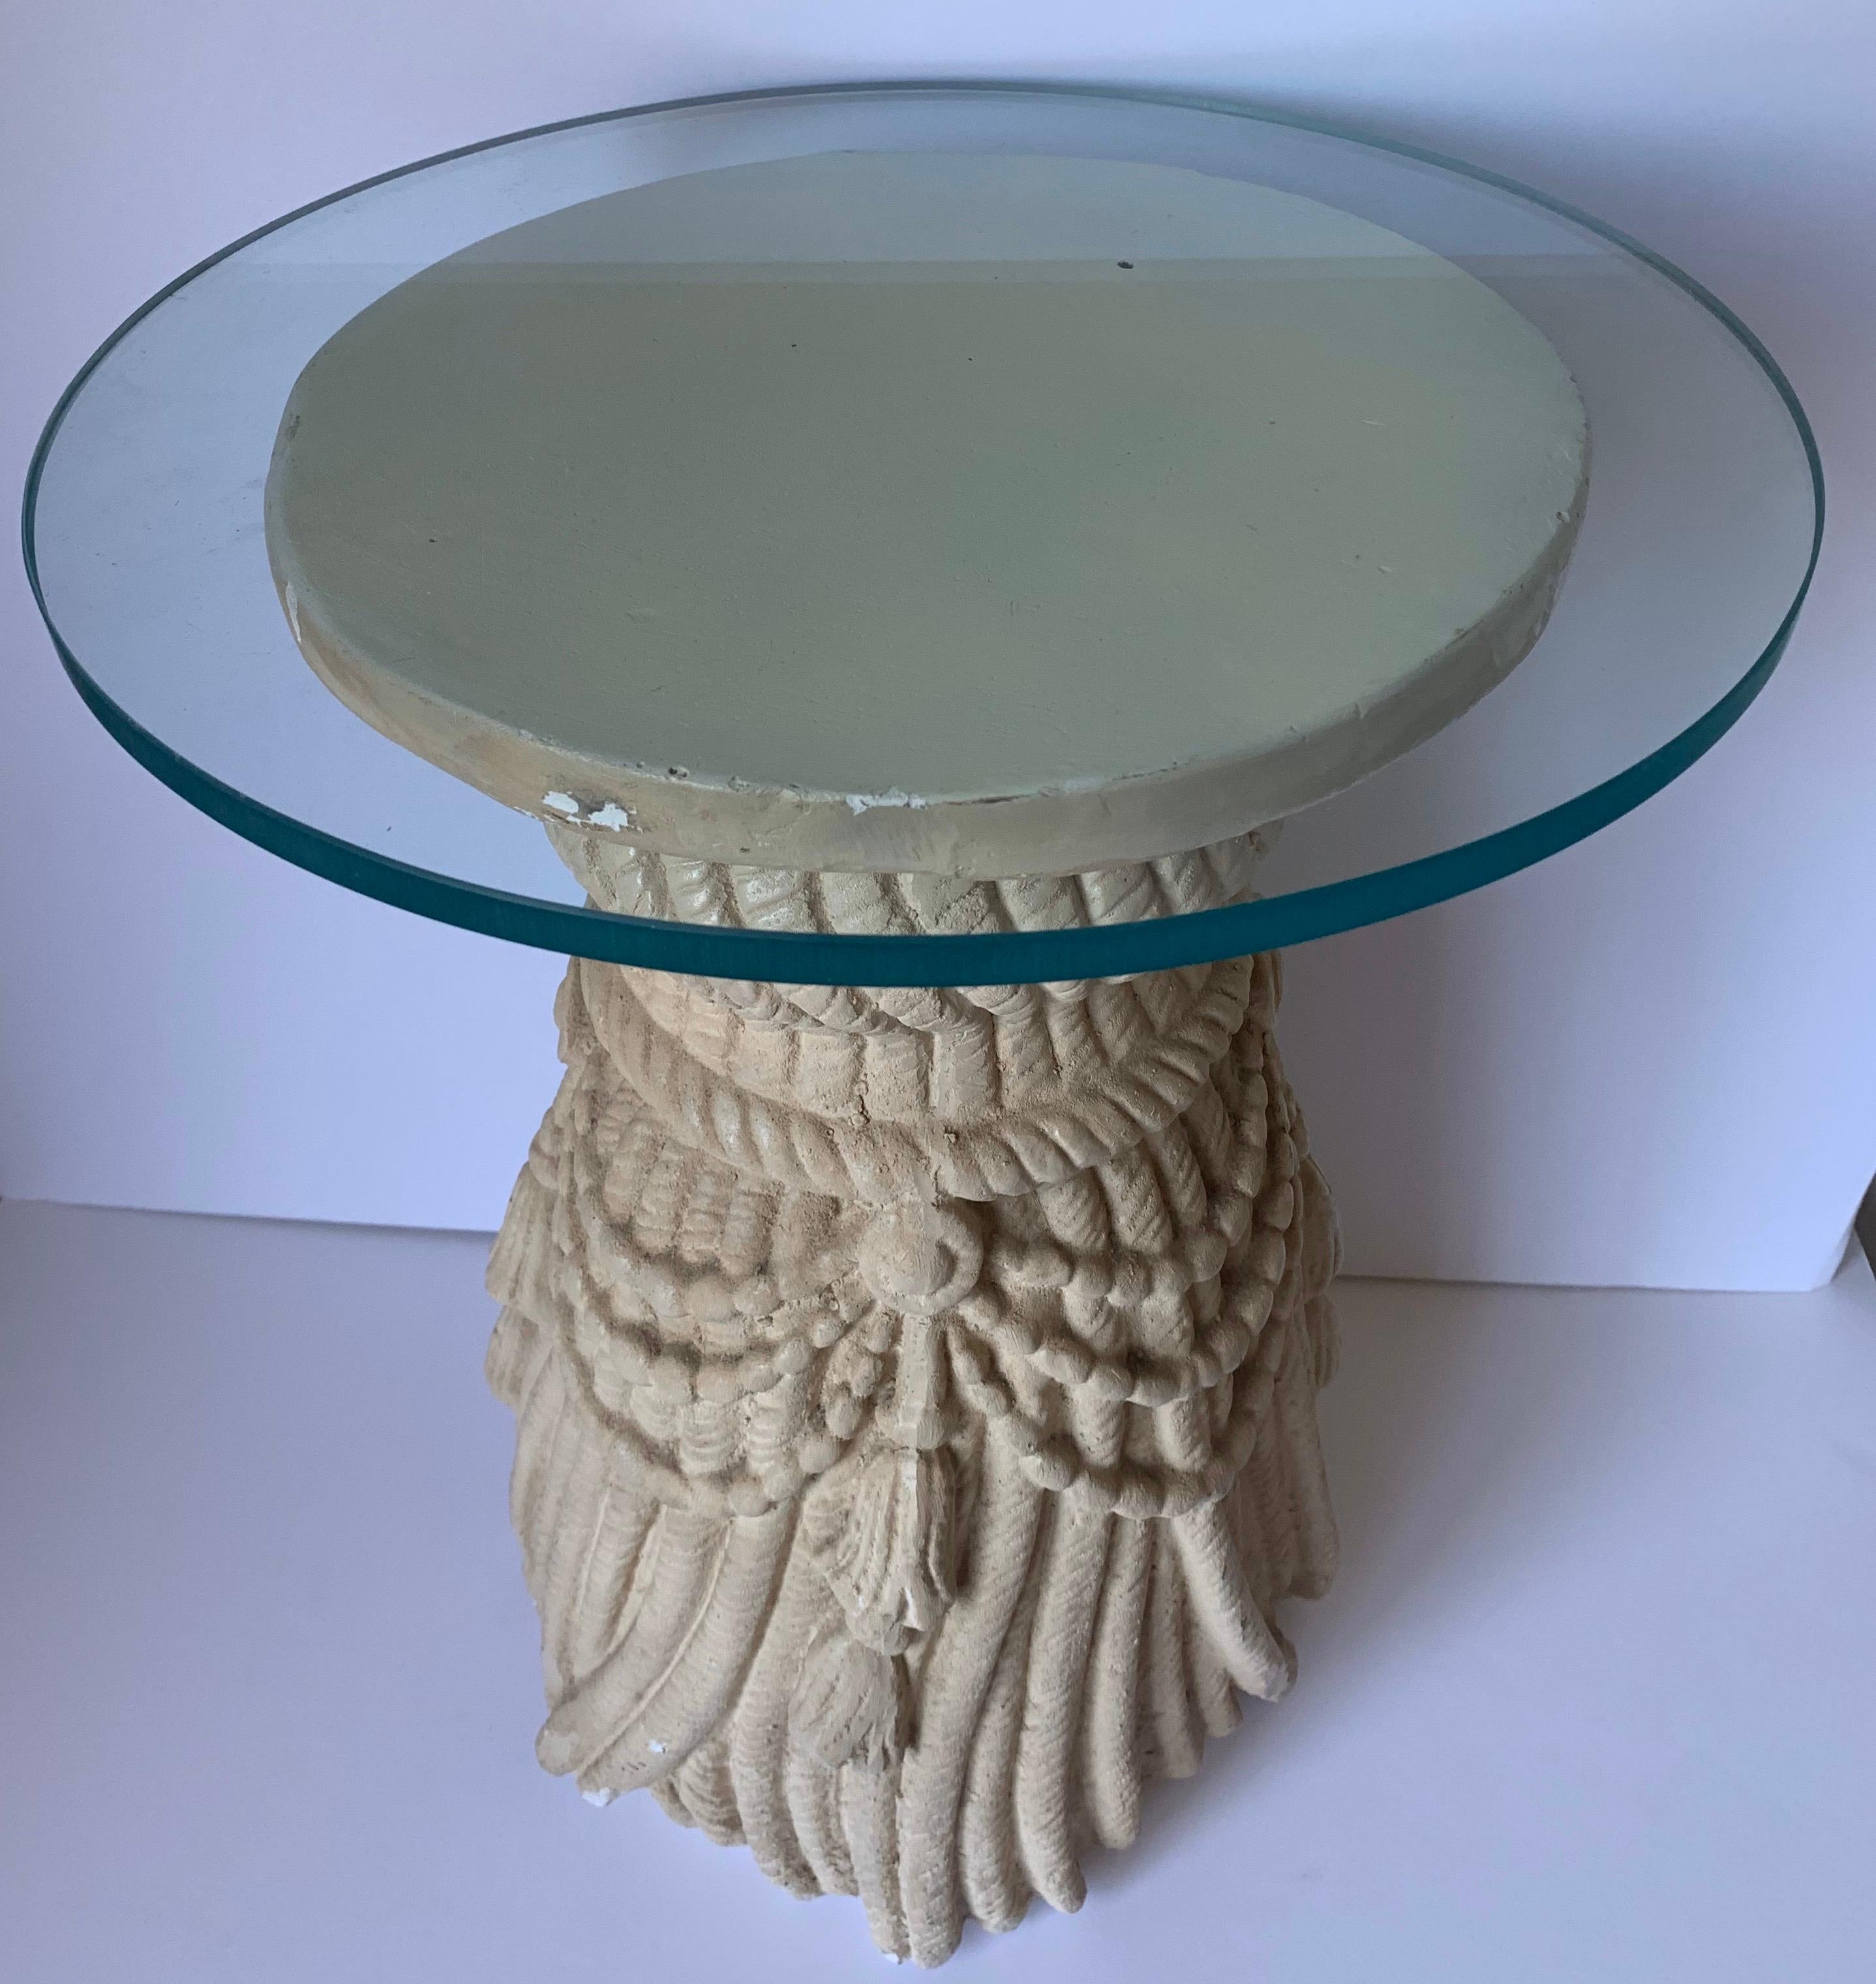 1970s tassel motif plaster side table. Original sand colored painted finish with all over age related wear. 14” round clear glass top.